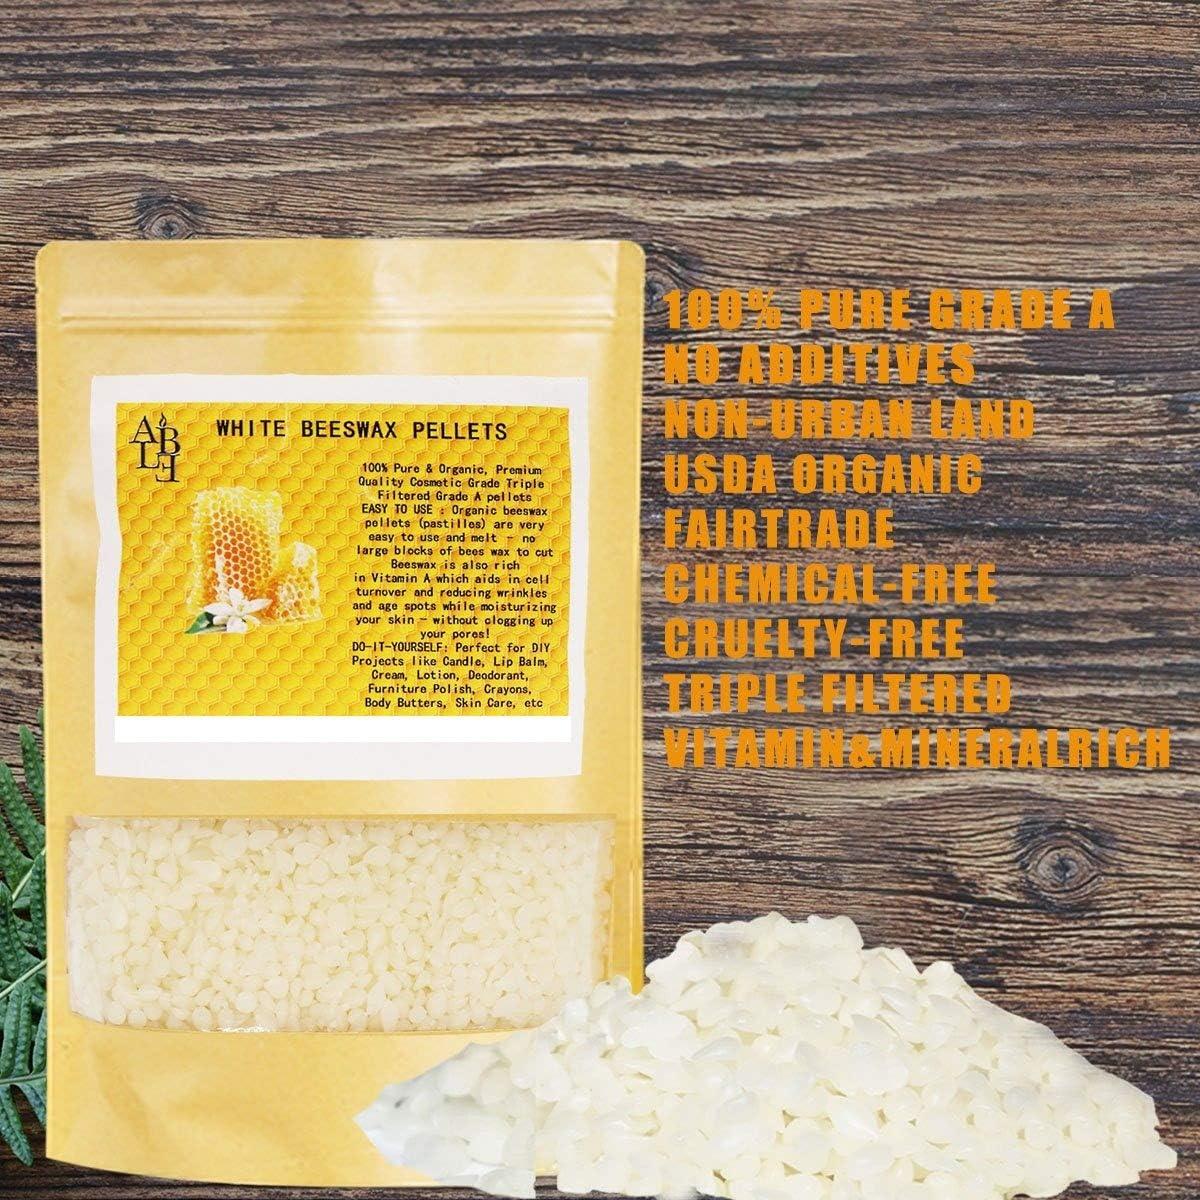  Howemon White Beeswax Pellets 2LB 100% Pure and